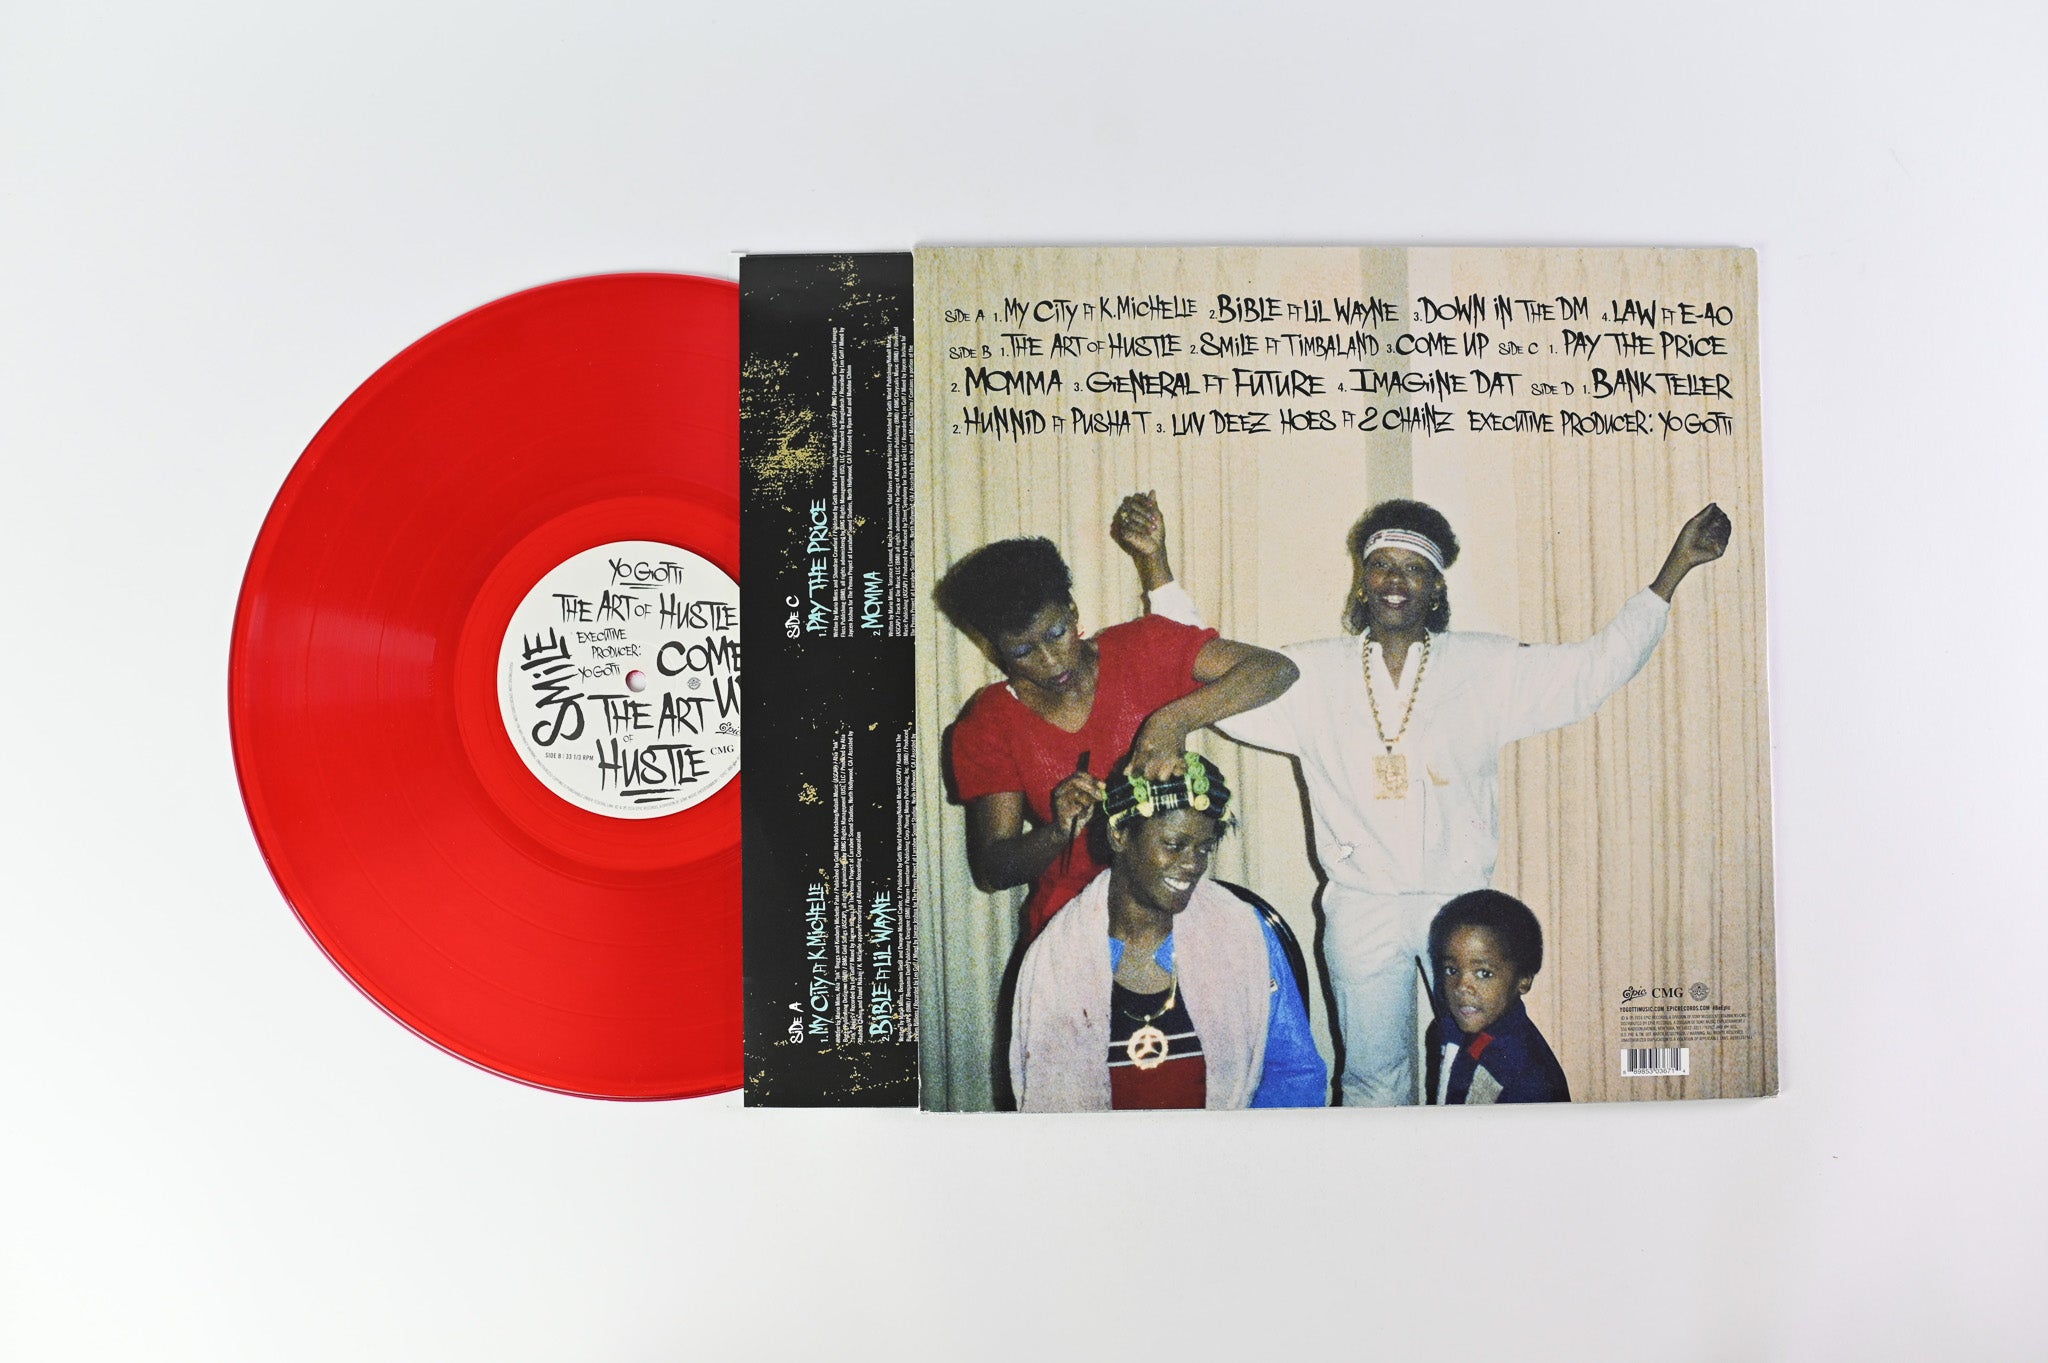 Yo Gotti - The Art Of Hustle Limited Edition Red Vinyl on Epic